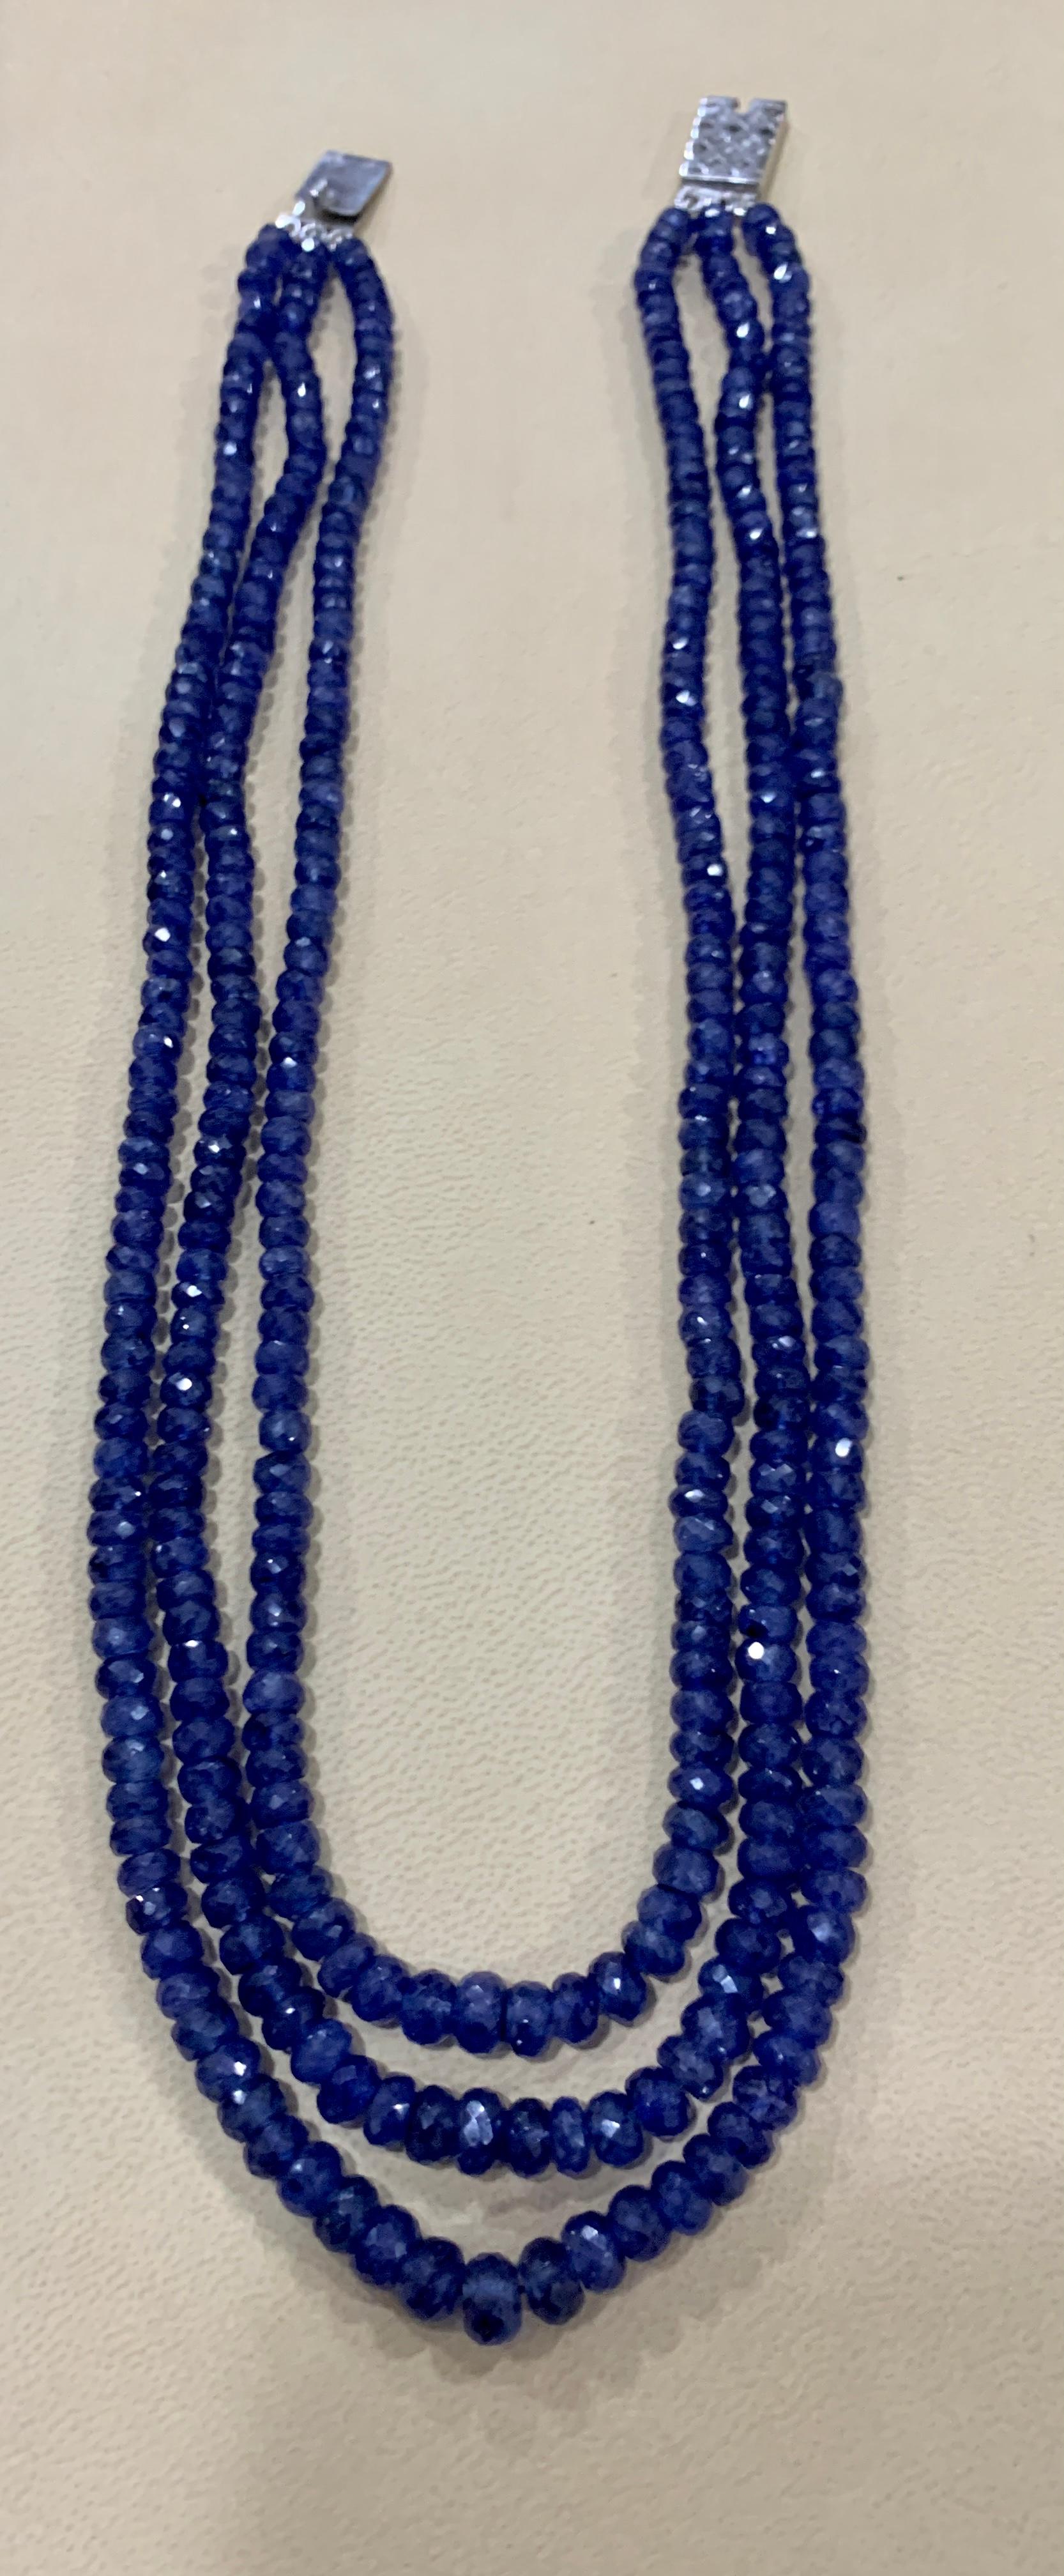 Natural  approximately  475  Ct Natural Tanzanite Bead triple Strand Necklace 14 Karat  white Gold clasp
All natural beads , no color enhancement
19